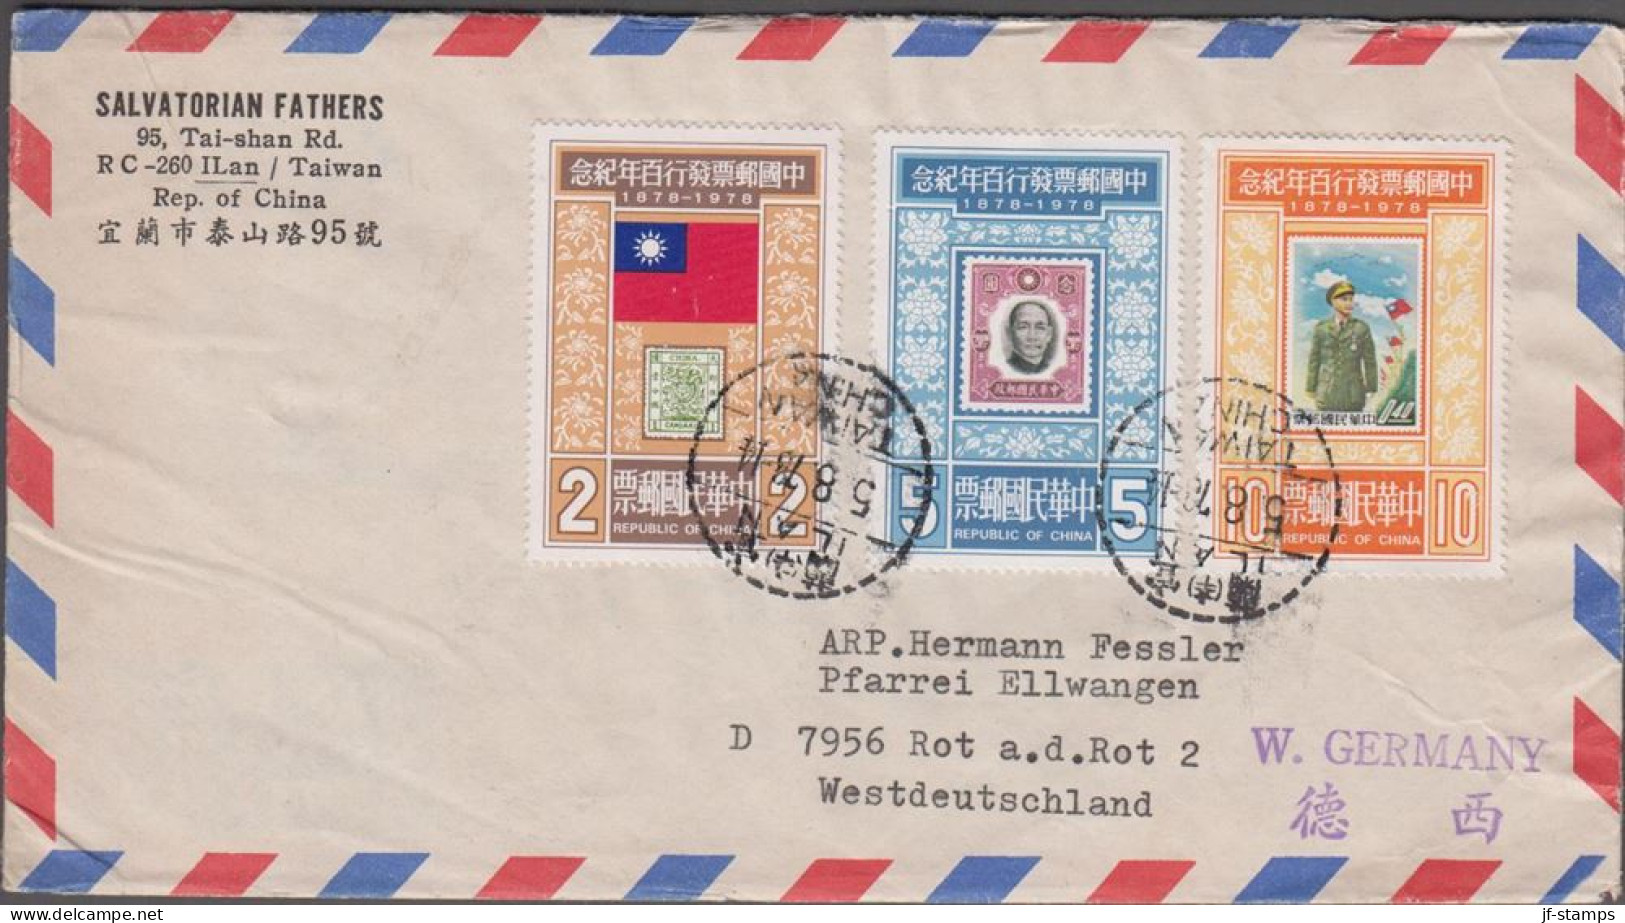 1978. TAIWAN. Complete Set 100 Years Stamps From China On Cover To Germany Cancelled TAIWAN 5 8 78. Sender... - JF524473 - Briefe U. Dokumente